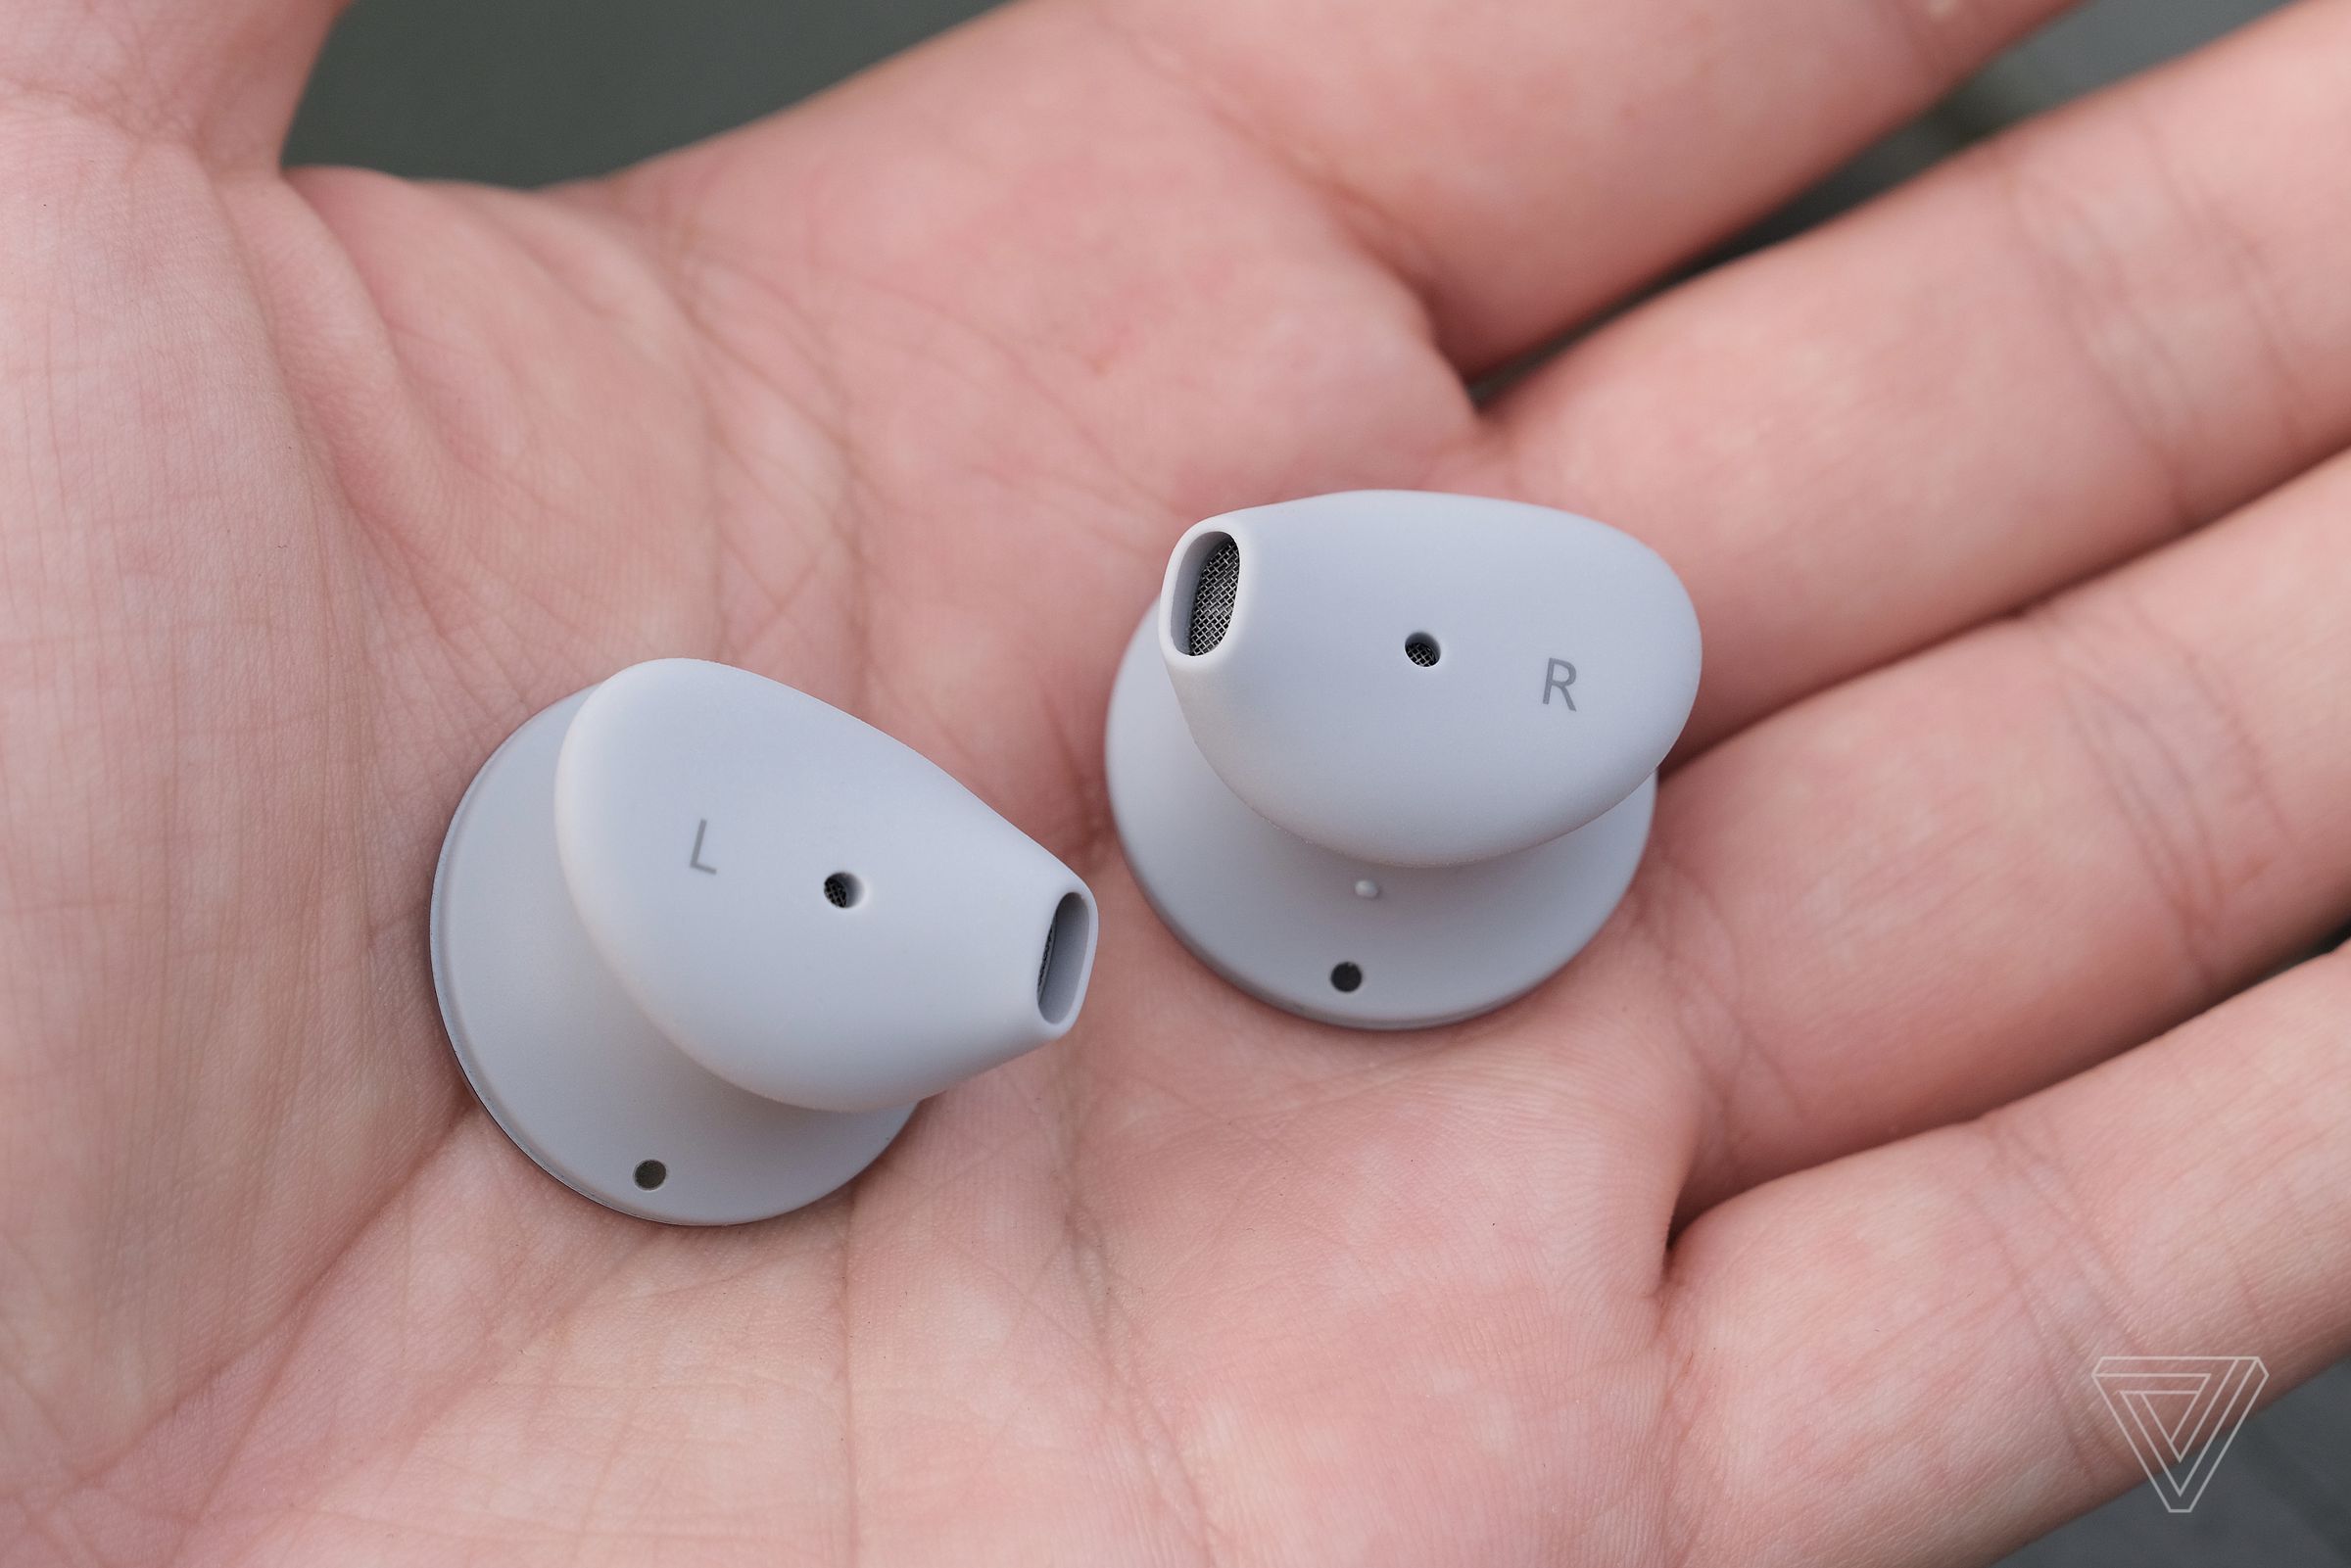 The left and right Surface Earbuds, pictured side by side in a hand.